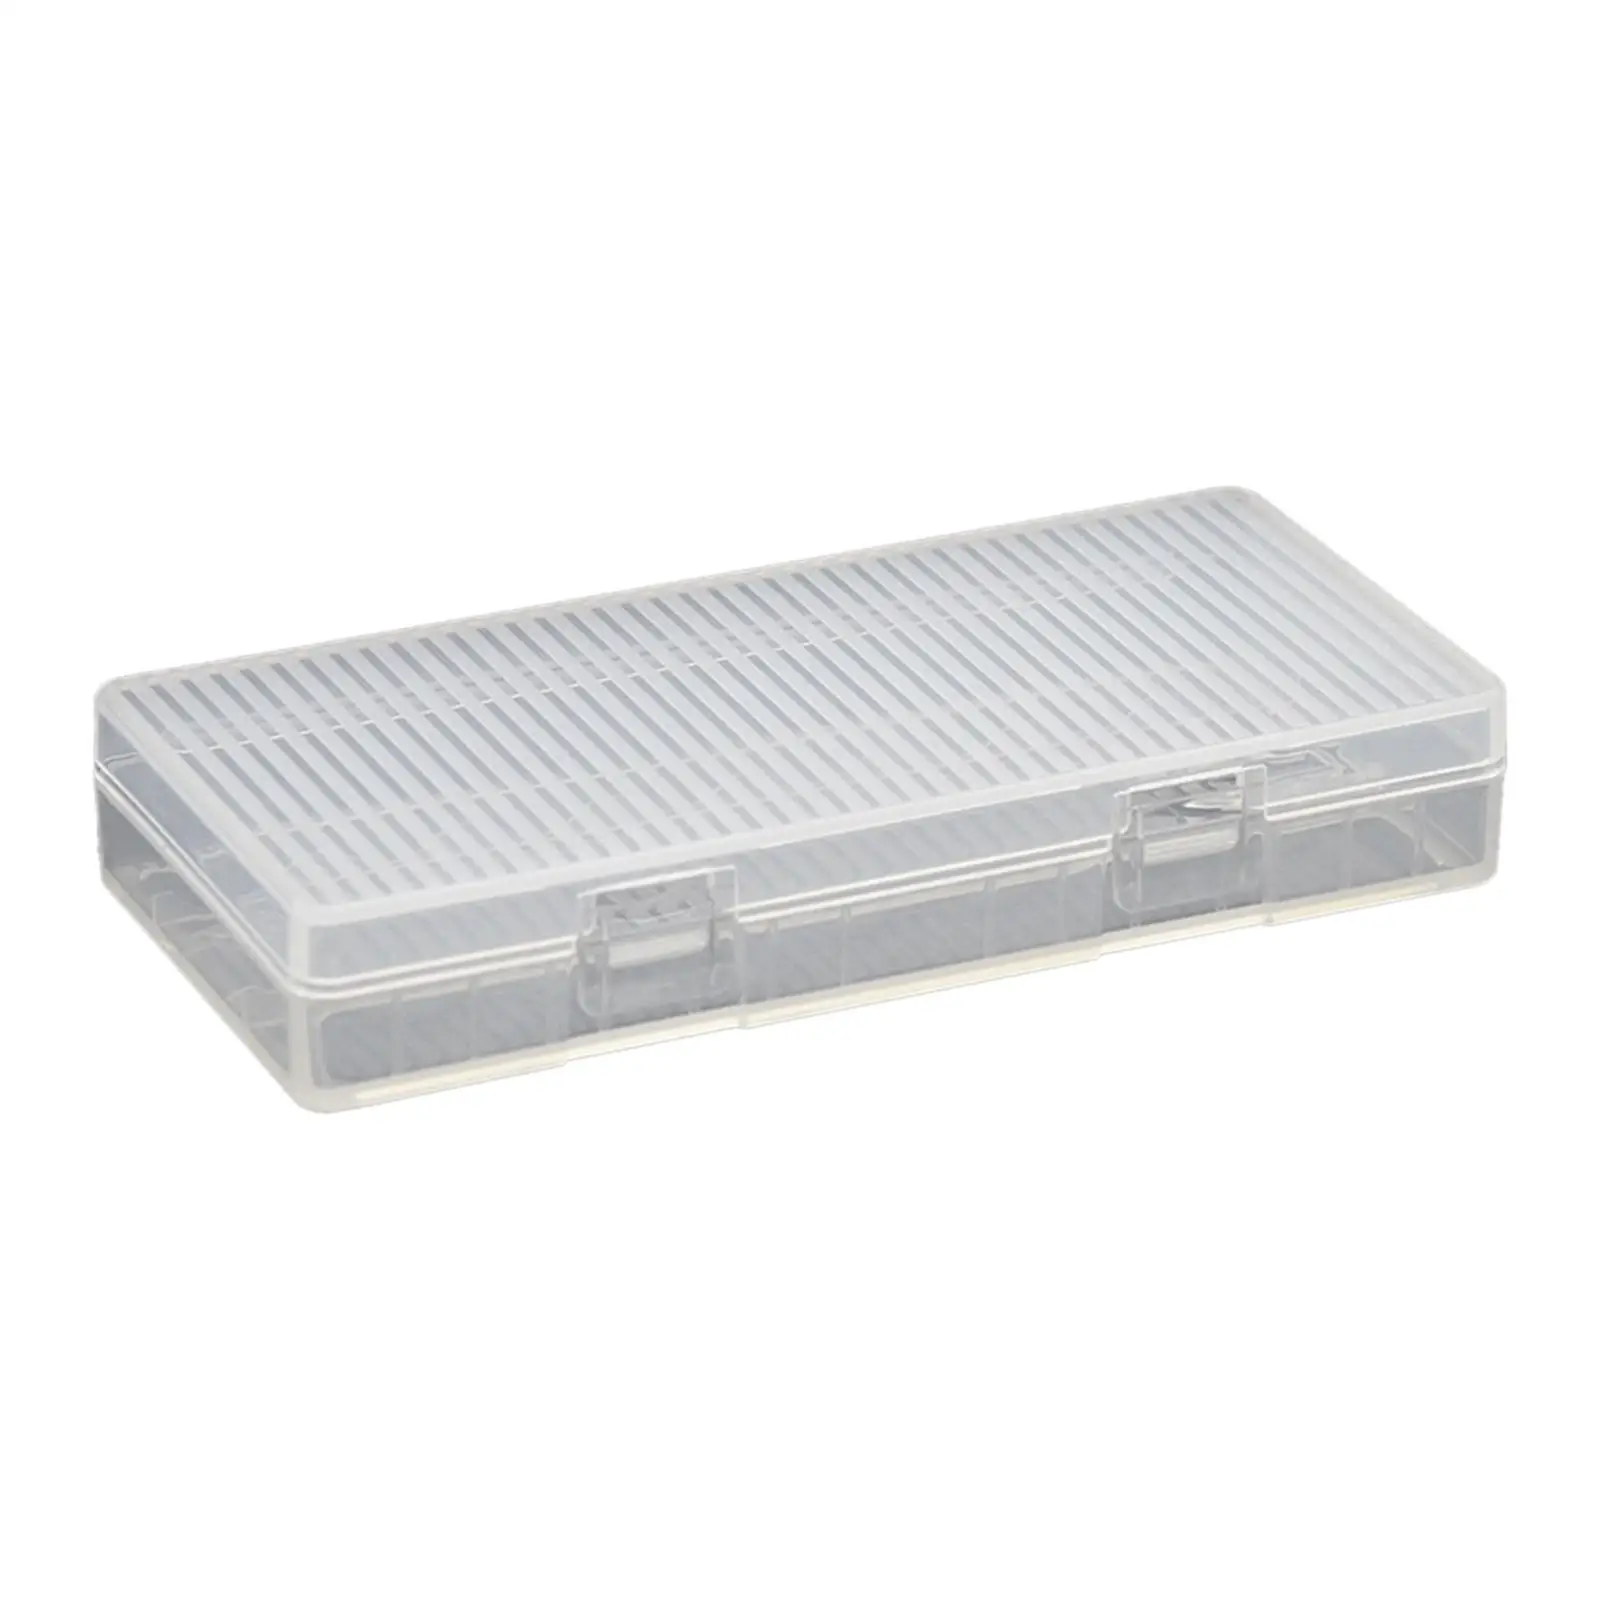 Battery Storage Case Holds 8 AA Batteries Clear Color Practical Dustproof Portable Durable Anti Collision Organizer Holder Box